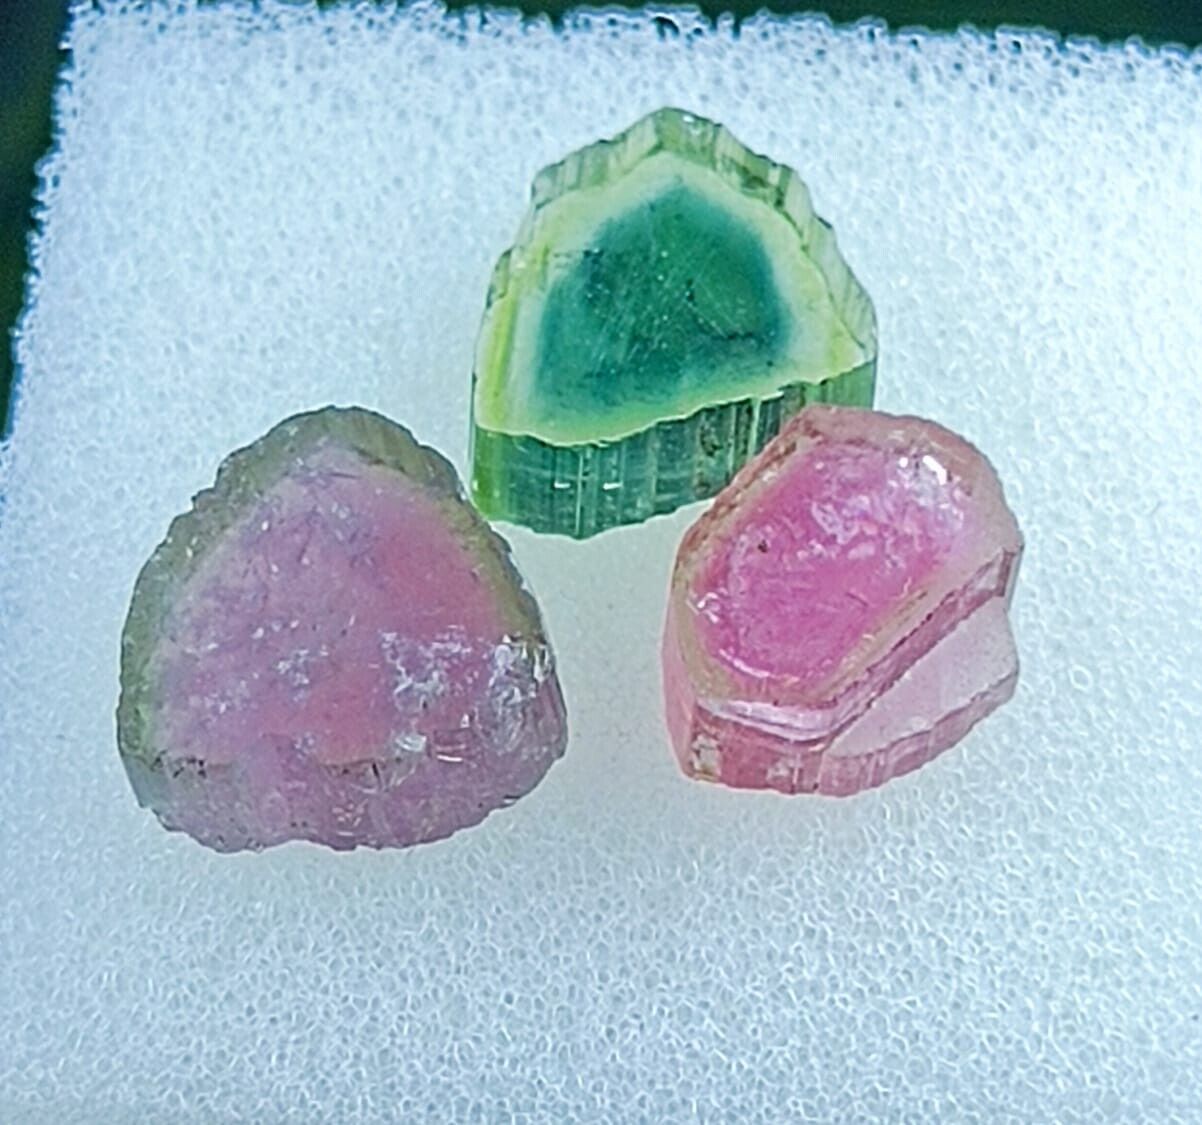 Pink And Green Slices Pcs With Nice Colour And Formation #3 Pcs